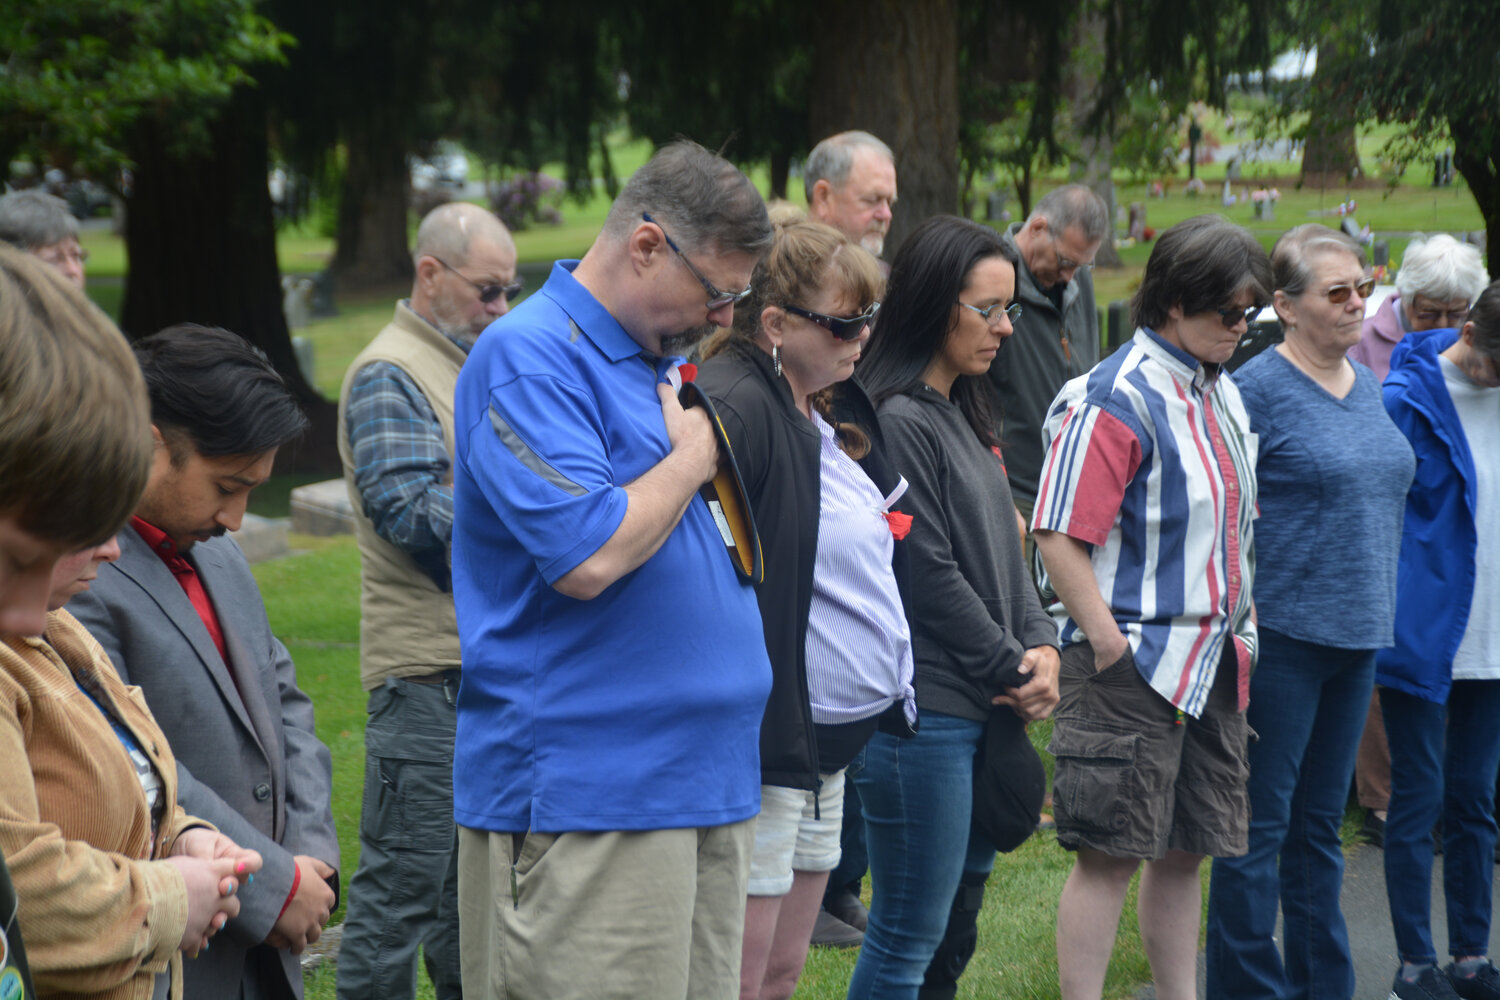 Those in attendance at a Memorial Day ceremony at the Yelm Cemetery bow their heads in prayer as Chaplain James A. Smith reads a passage.